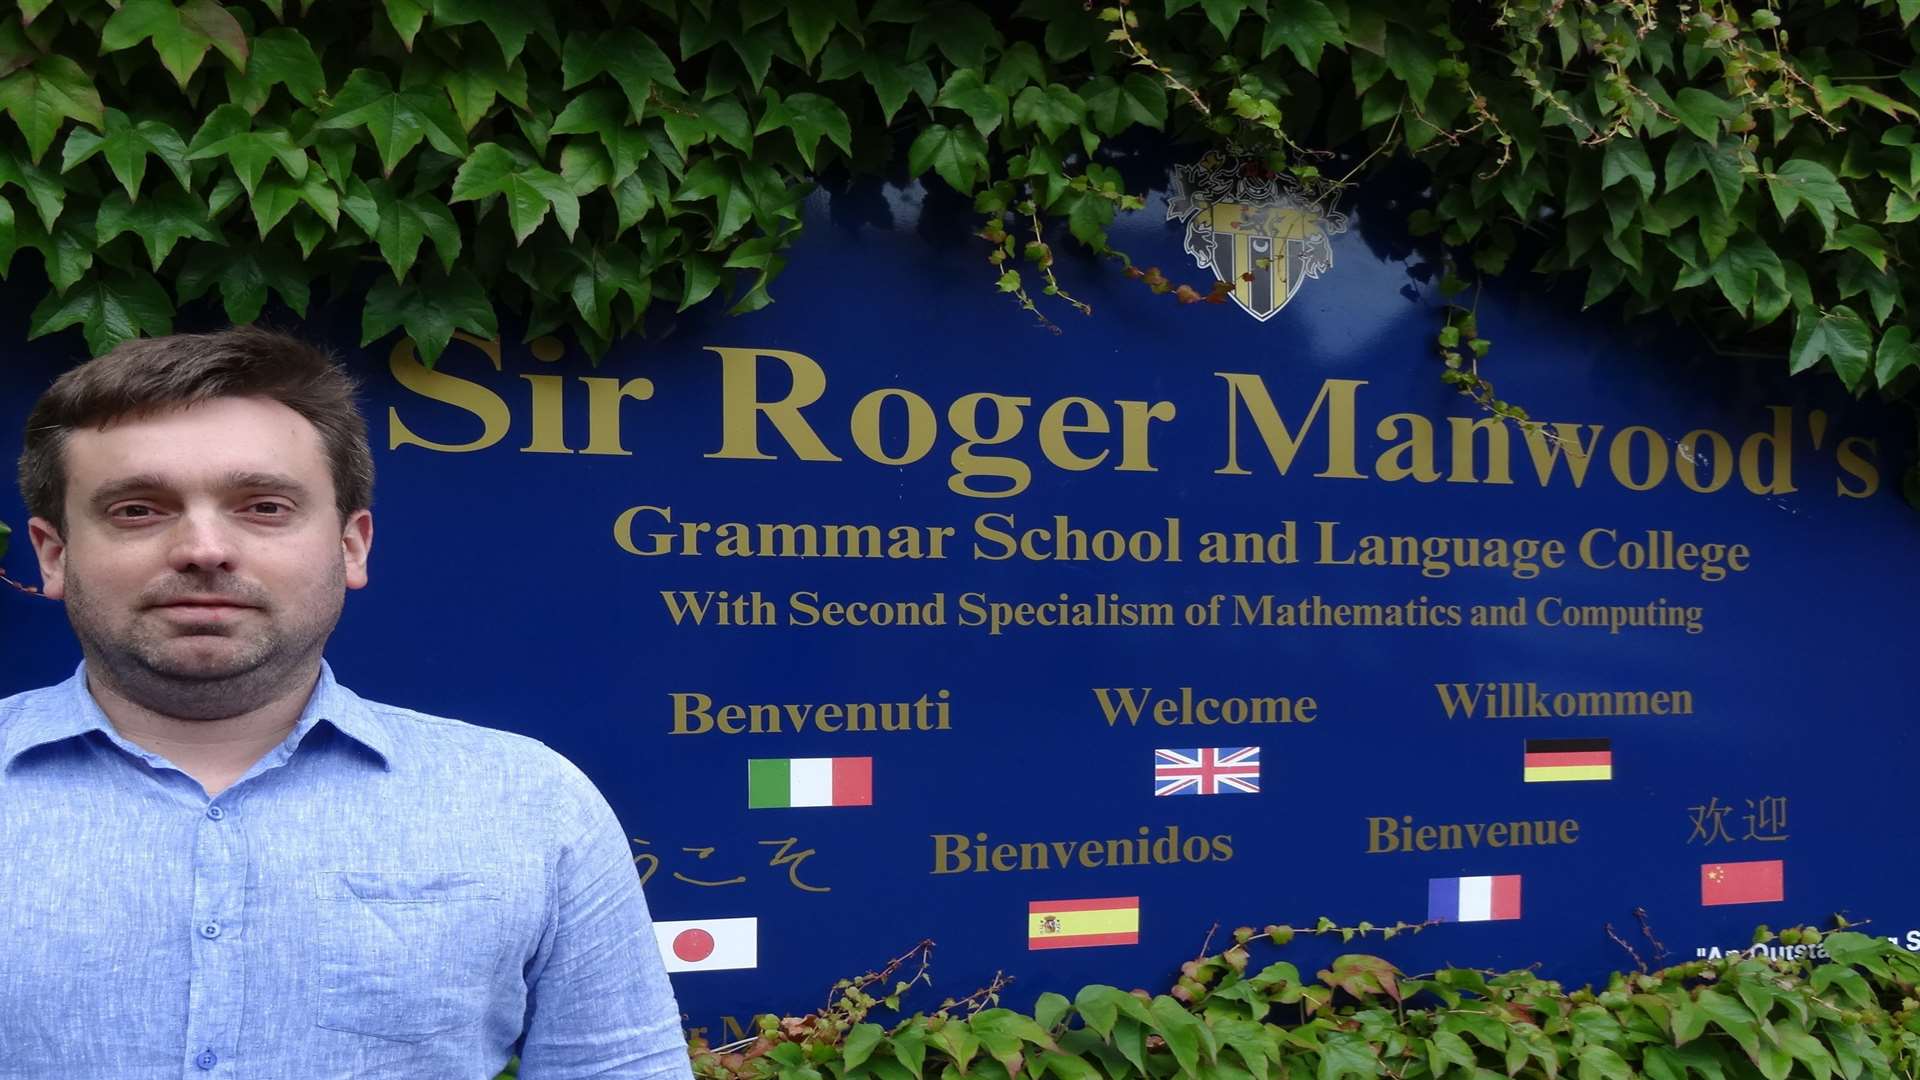 Thomas Molloy, School Business Manager at Sir Roger Manwood's School, is delighted with the donation from Vigilant Global